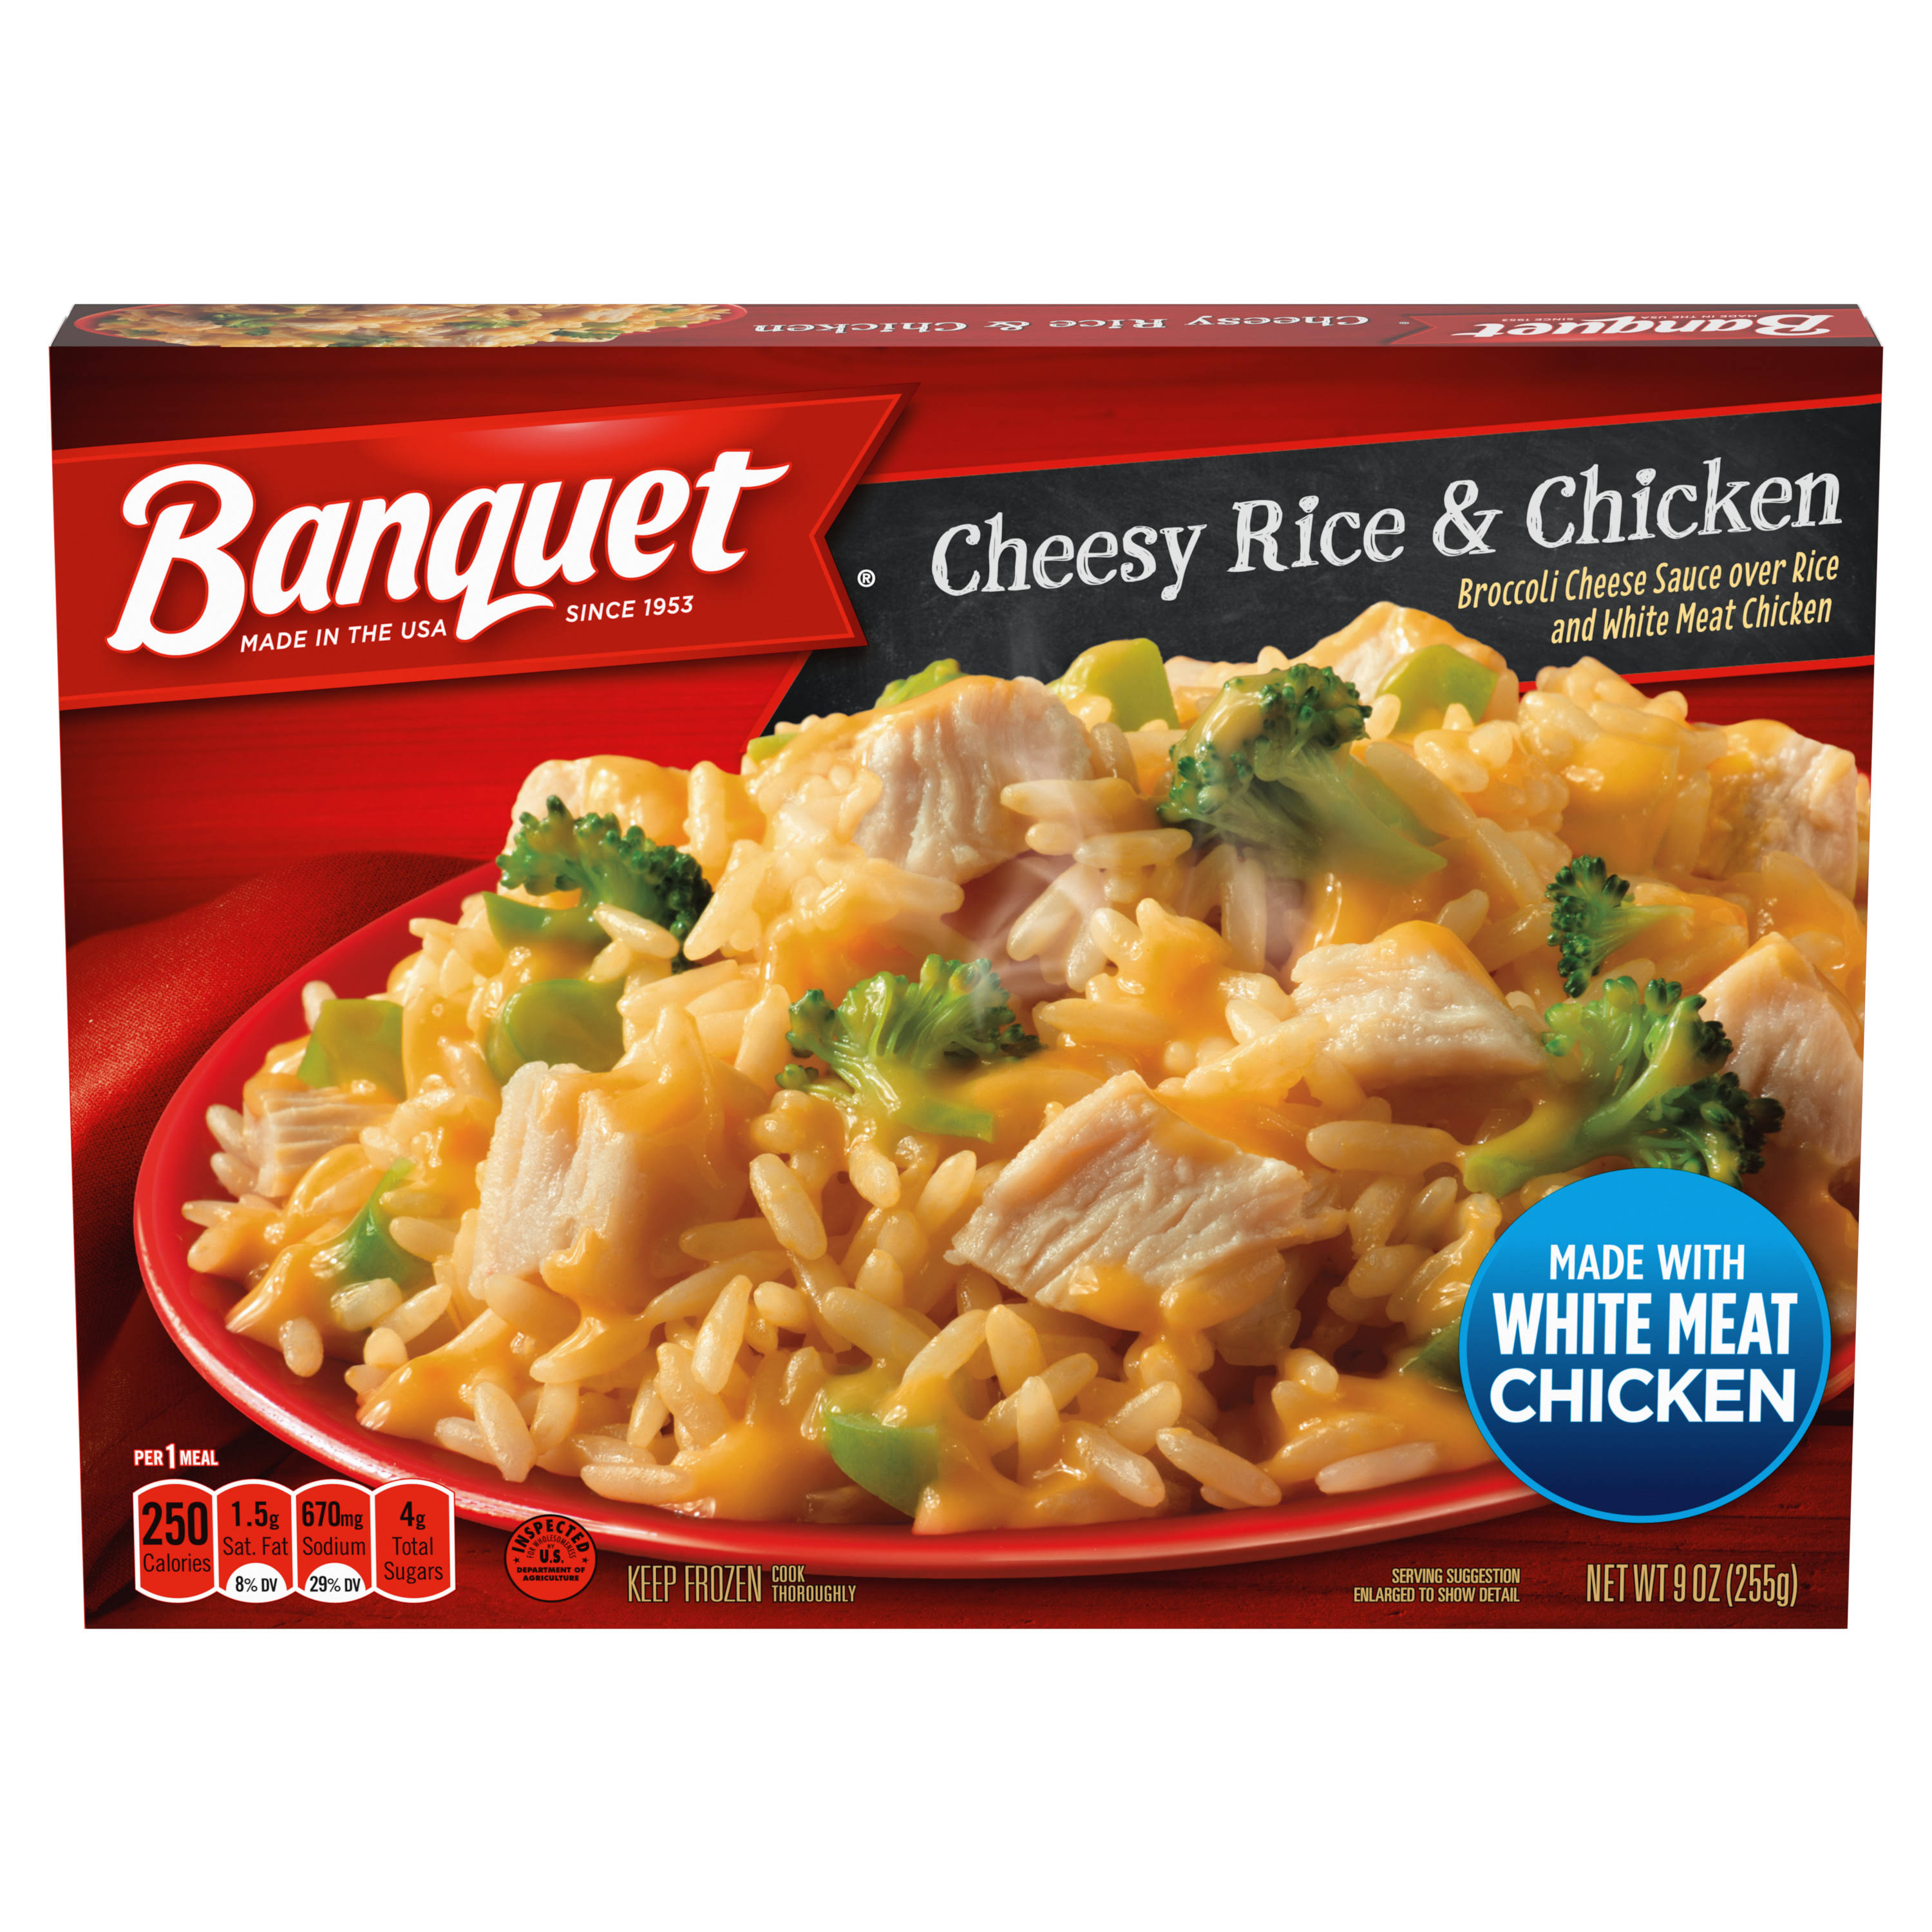 Banquet Cheesy Rice and Chicken Frozen Meal - 9oz